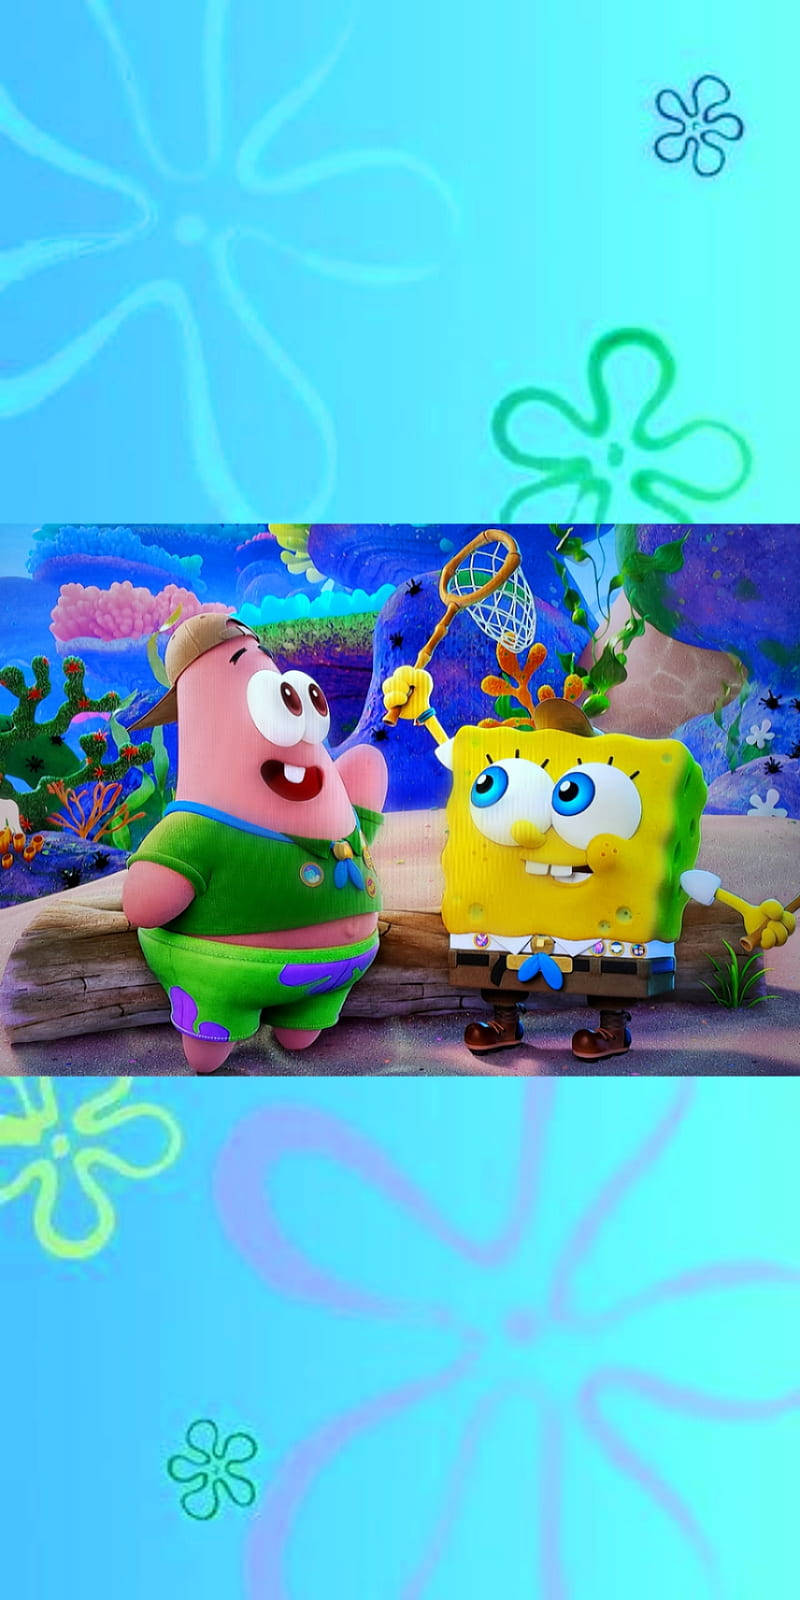 Young Spongebob And Patrick Catching Jellyfish